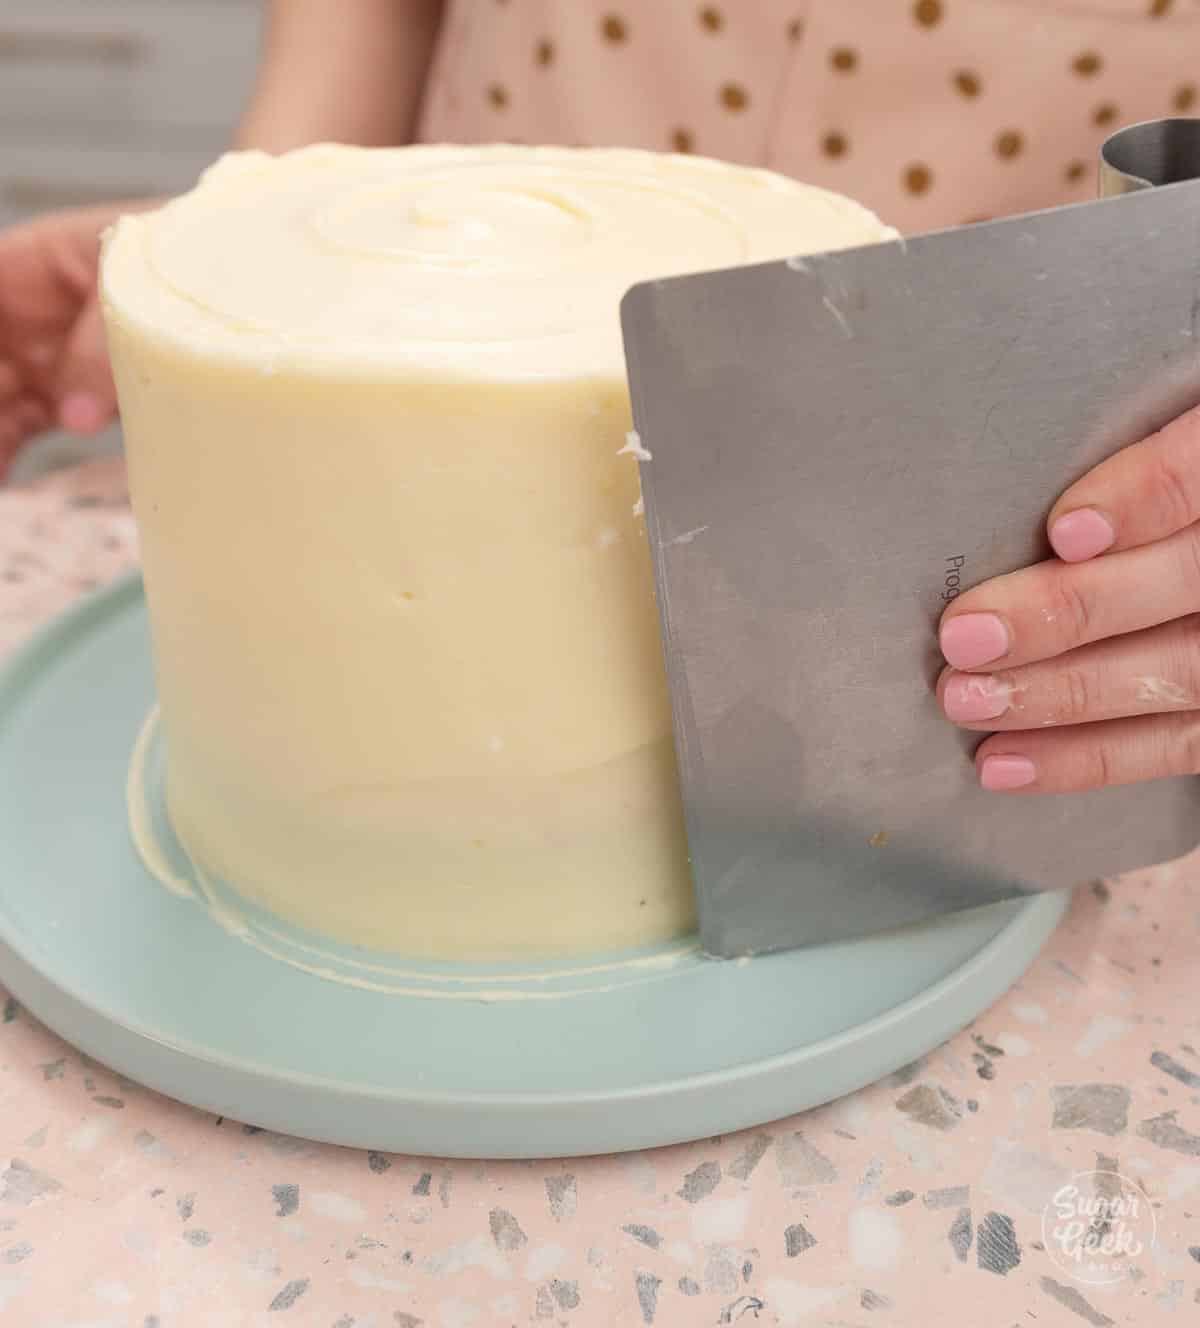 smoothing a cake with a bench scraper